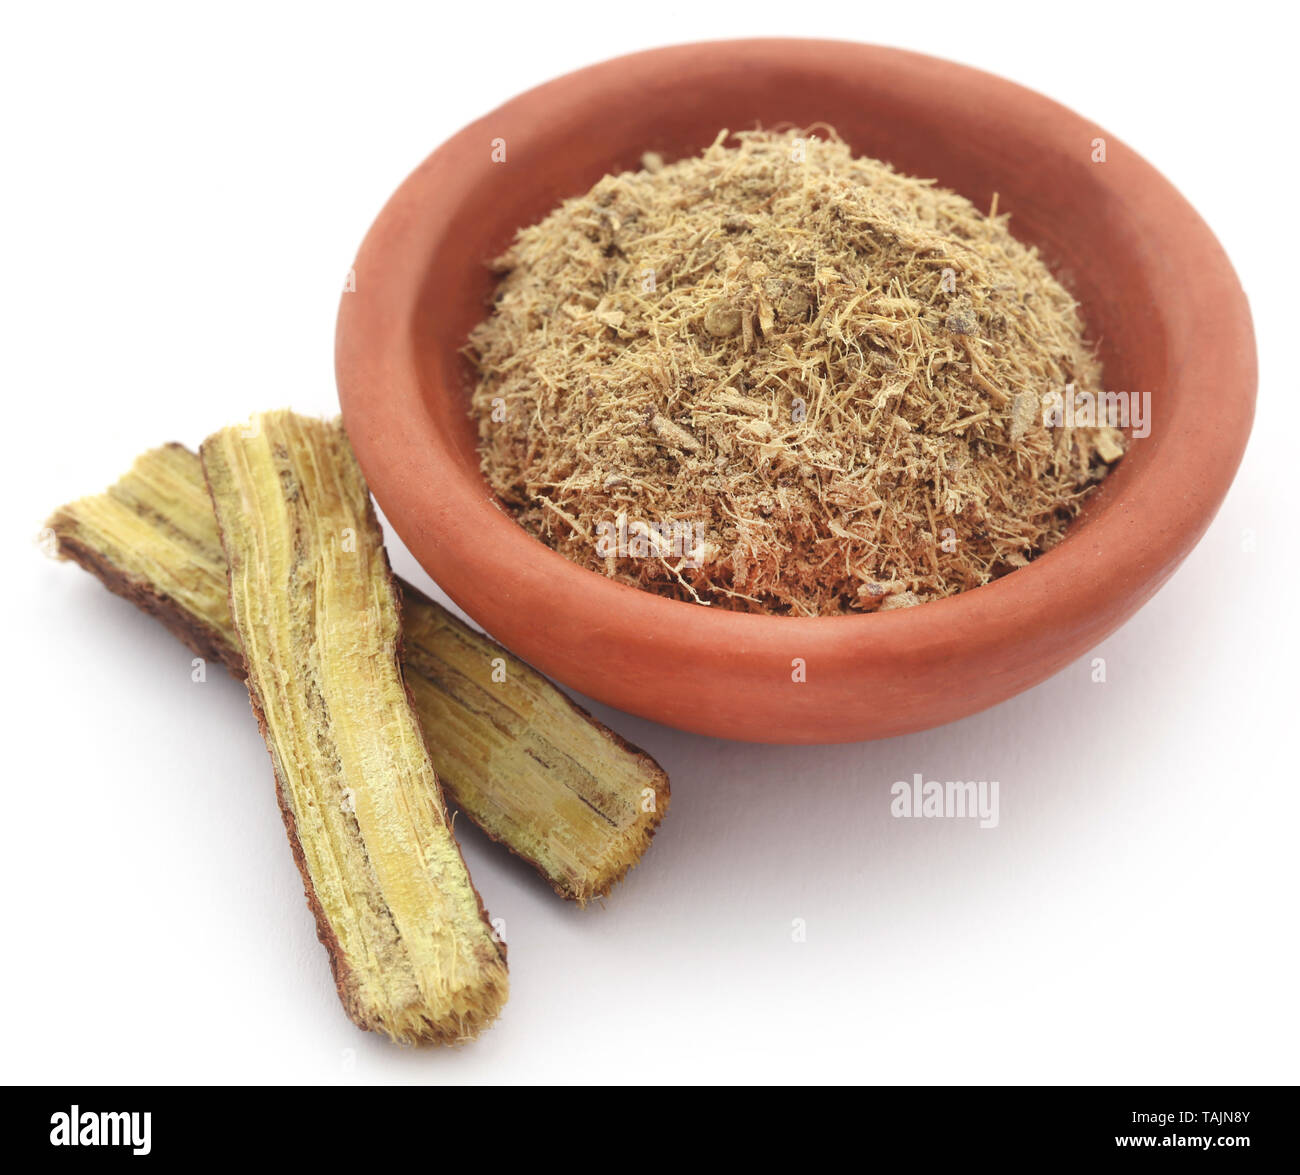 Liquorice stick and ground powder in a bowl over white background Stock Photo